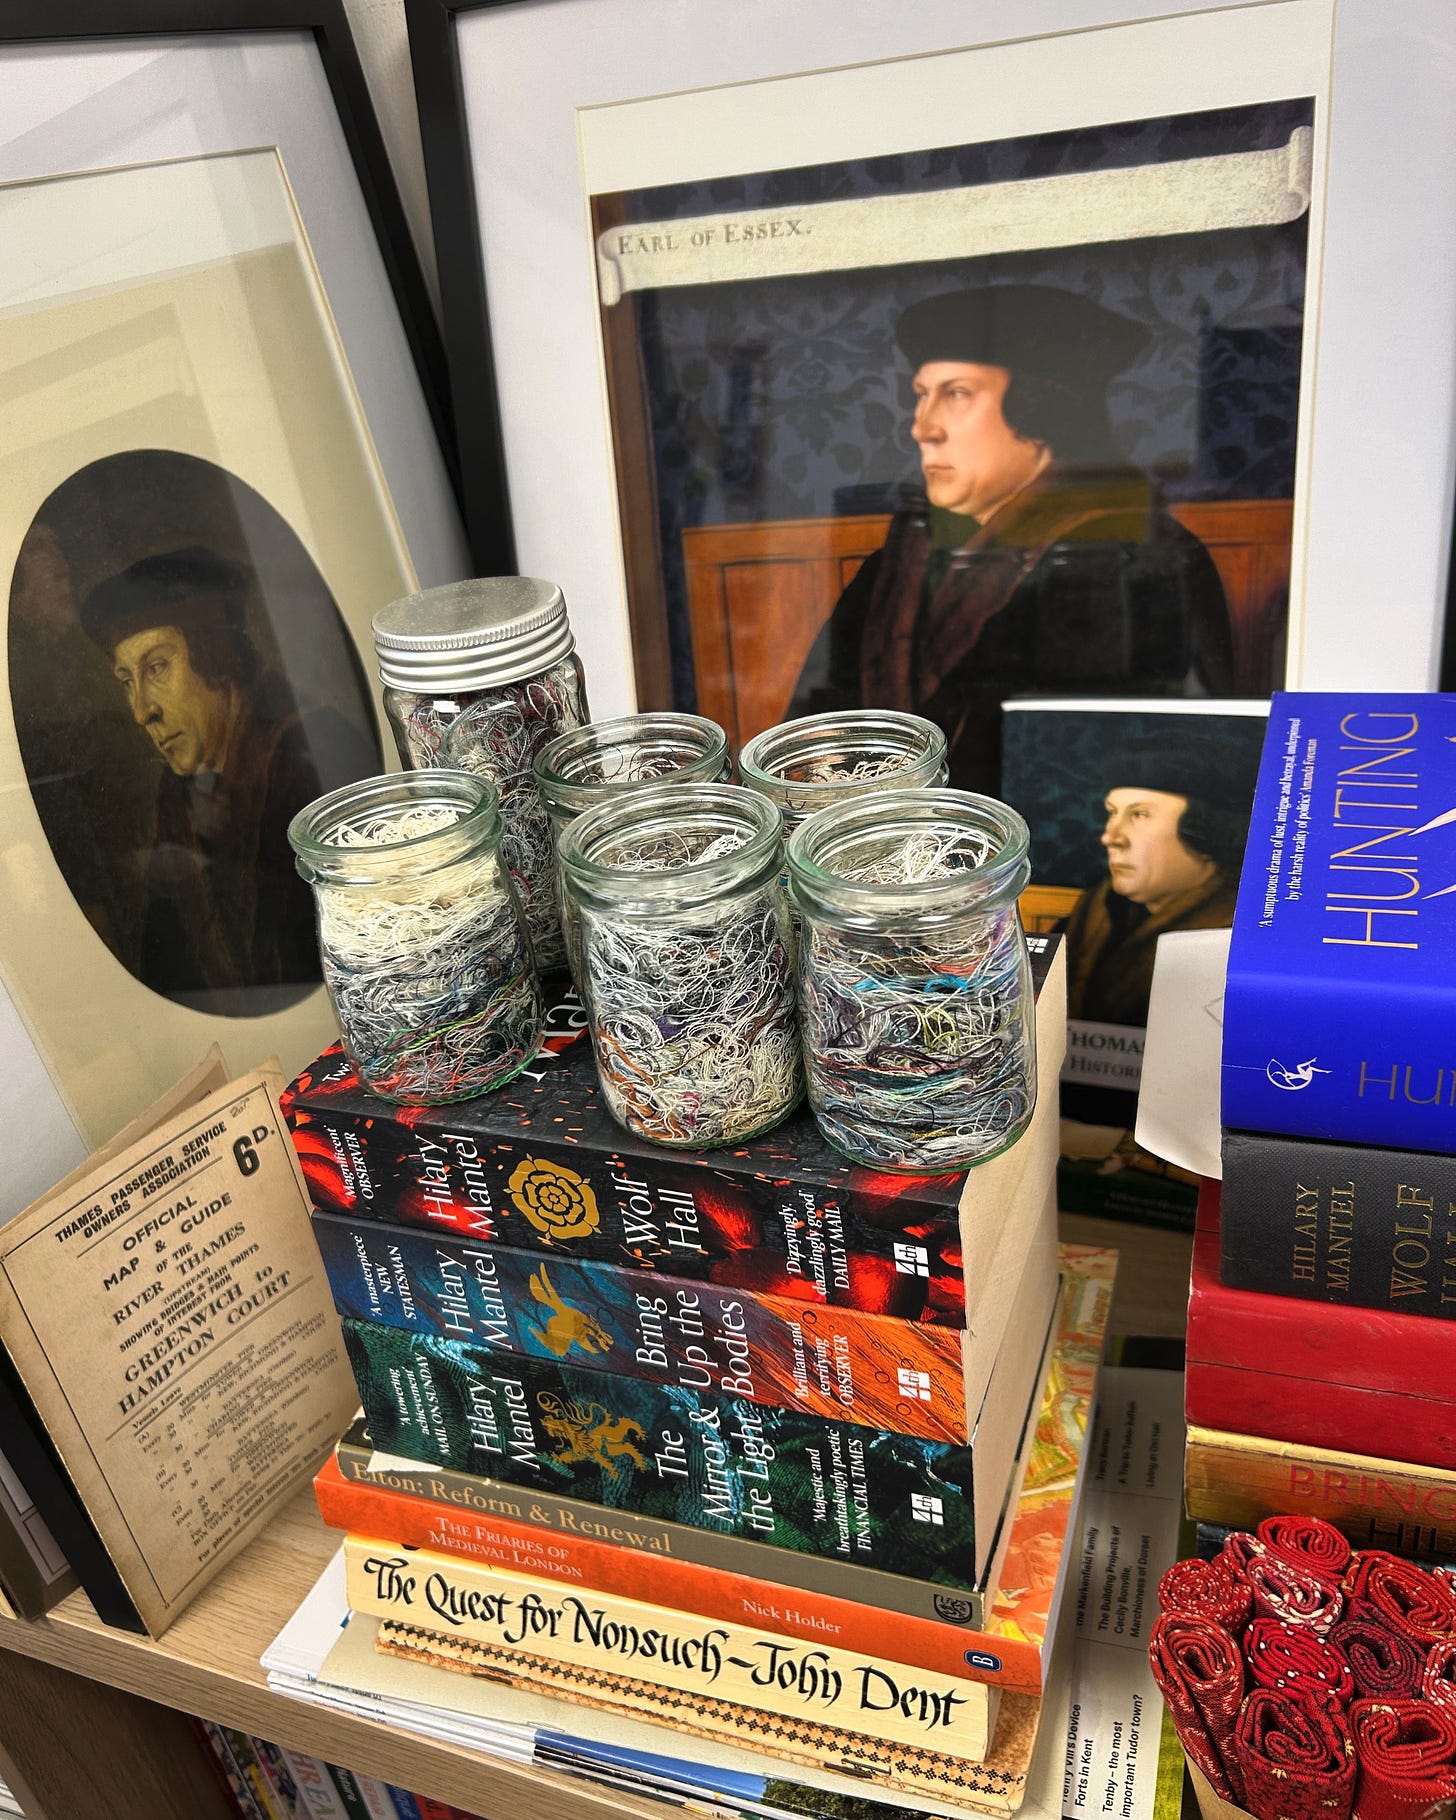 Six jars of cut thread resting on a pile of books about Thomas Cromwell and Tudor England. There are portraits of Thomas Cromwell leaning up on the wall behind the pile of books.